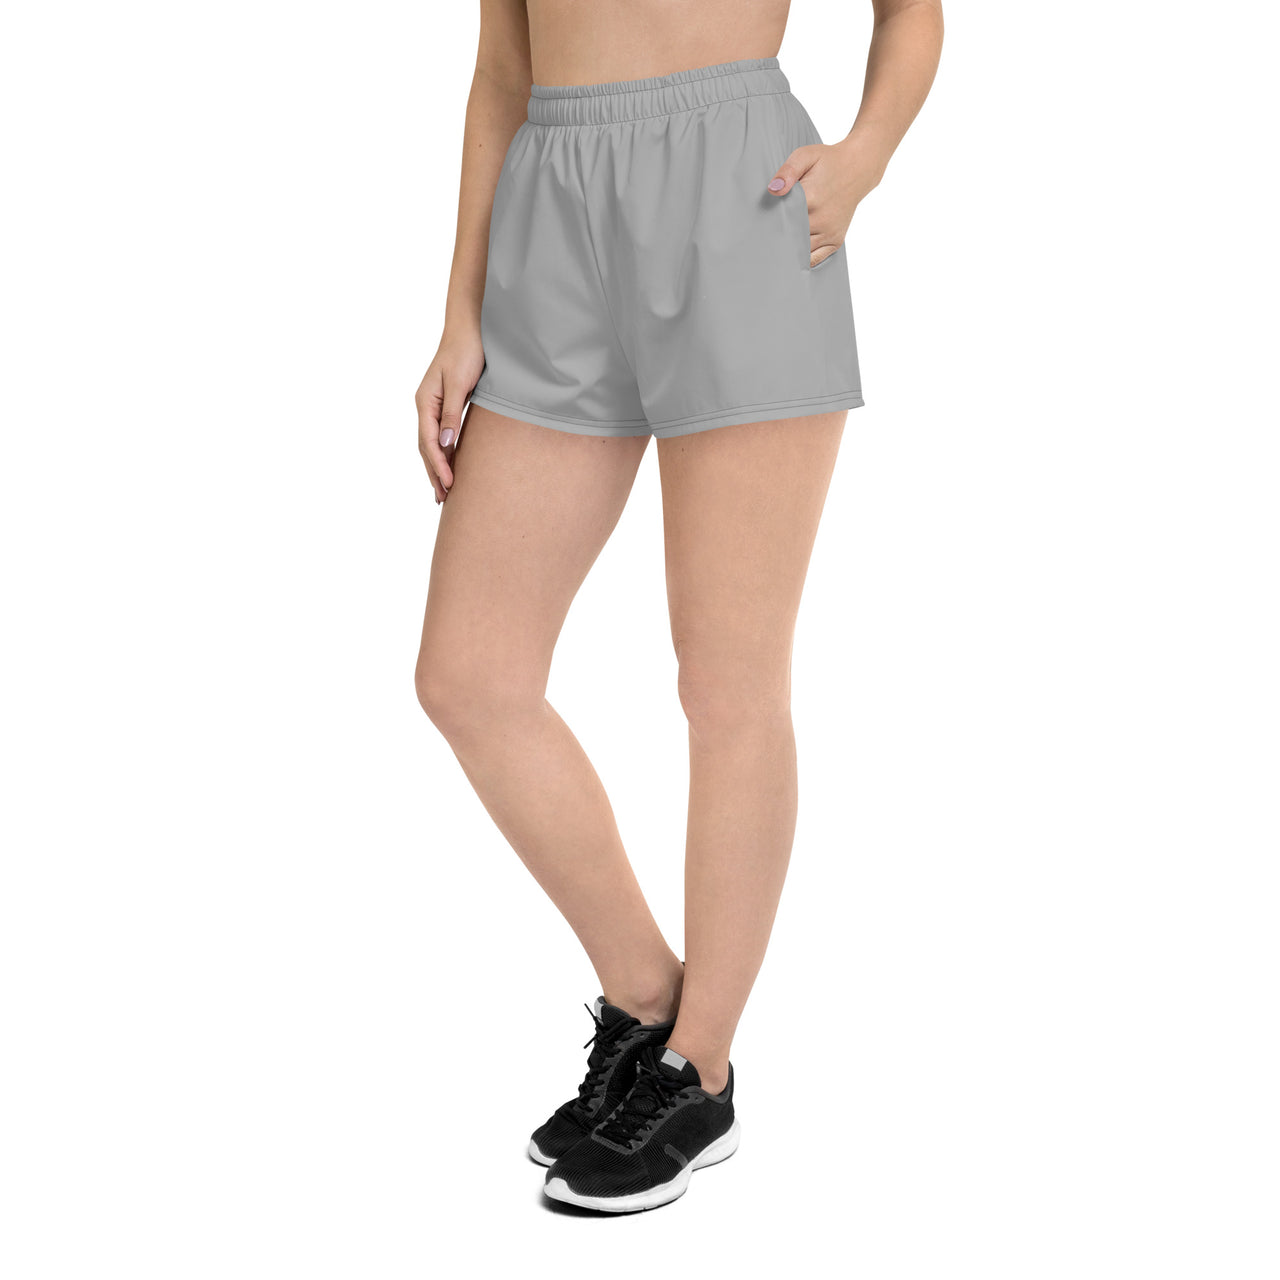 Women’s Recycled Solid Athletic Shorts - Pewter SHAVA CO